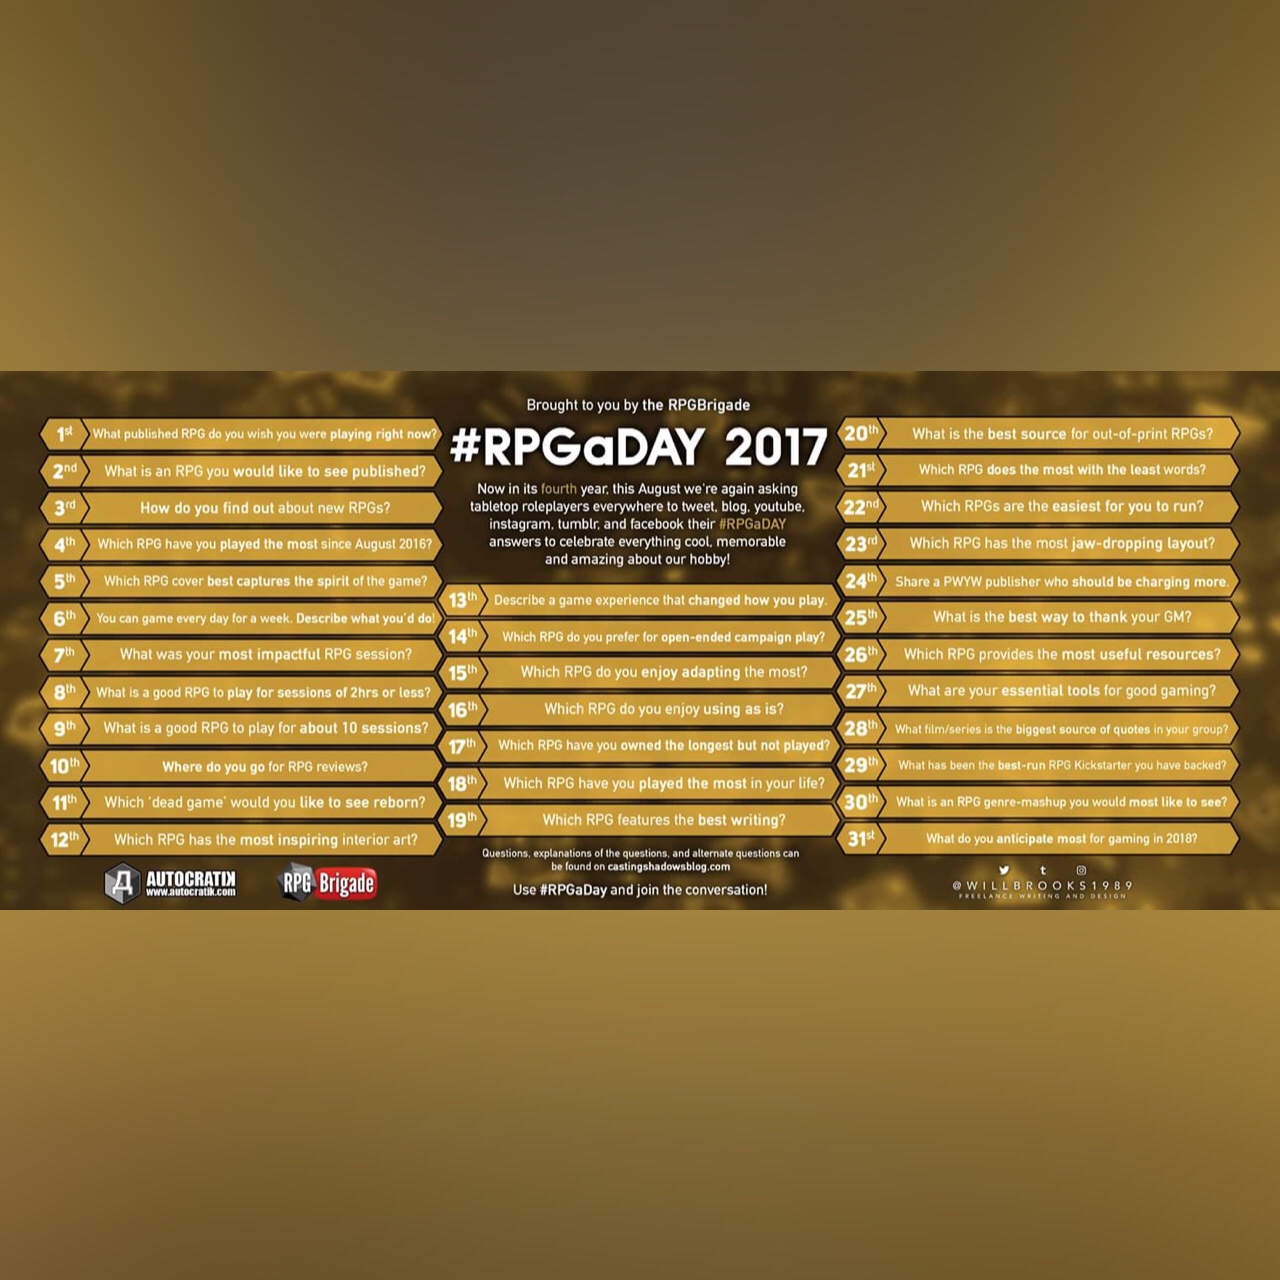 RPGaDAY 2017 August 27 What are your essential tools for good gaming?